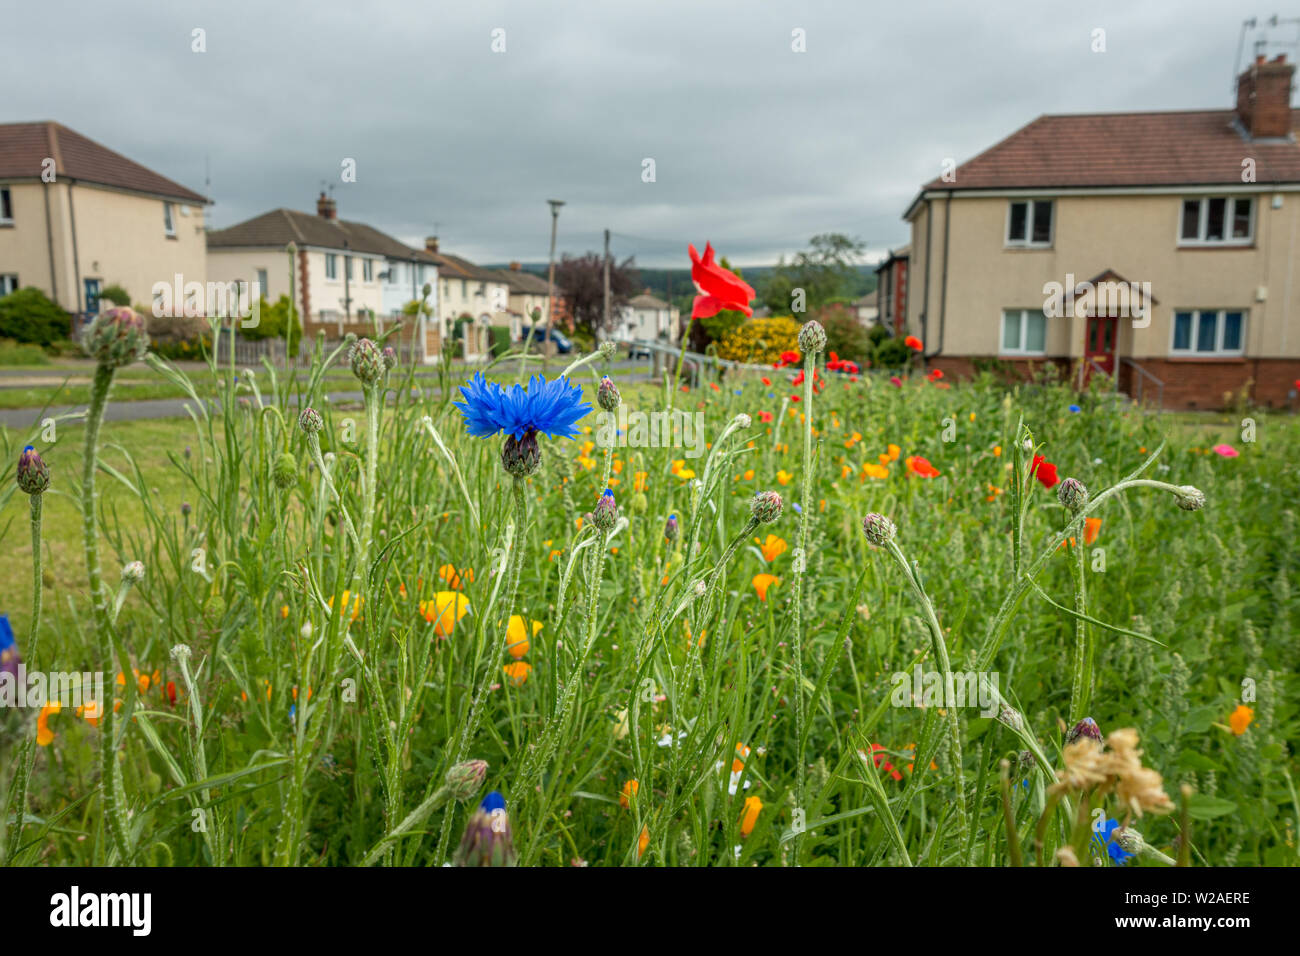 Pretty display of an annual wild flower mix attracting bees in particular, planted in the middle of a housing estate in Ilkley, West Yorkshire, UK Stock Photo